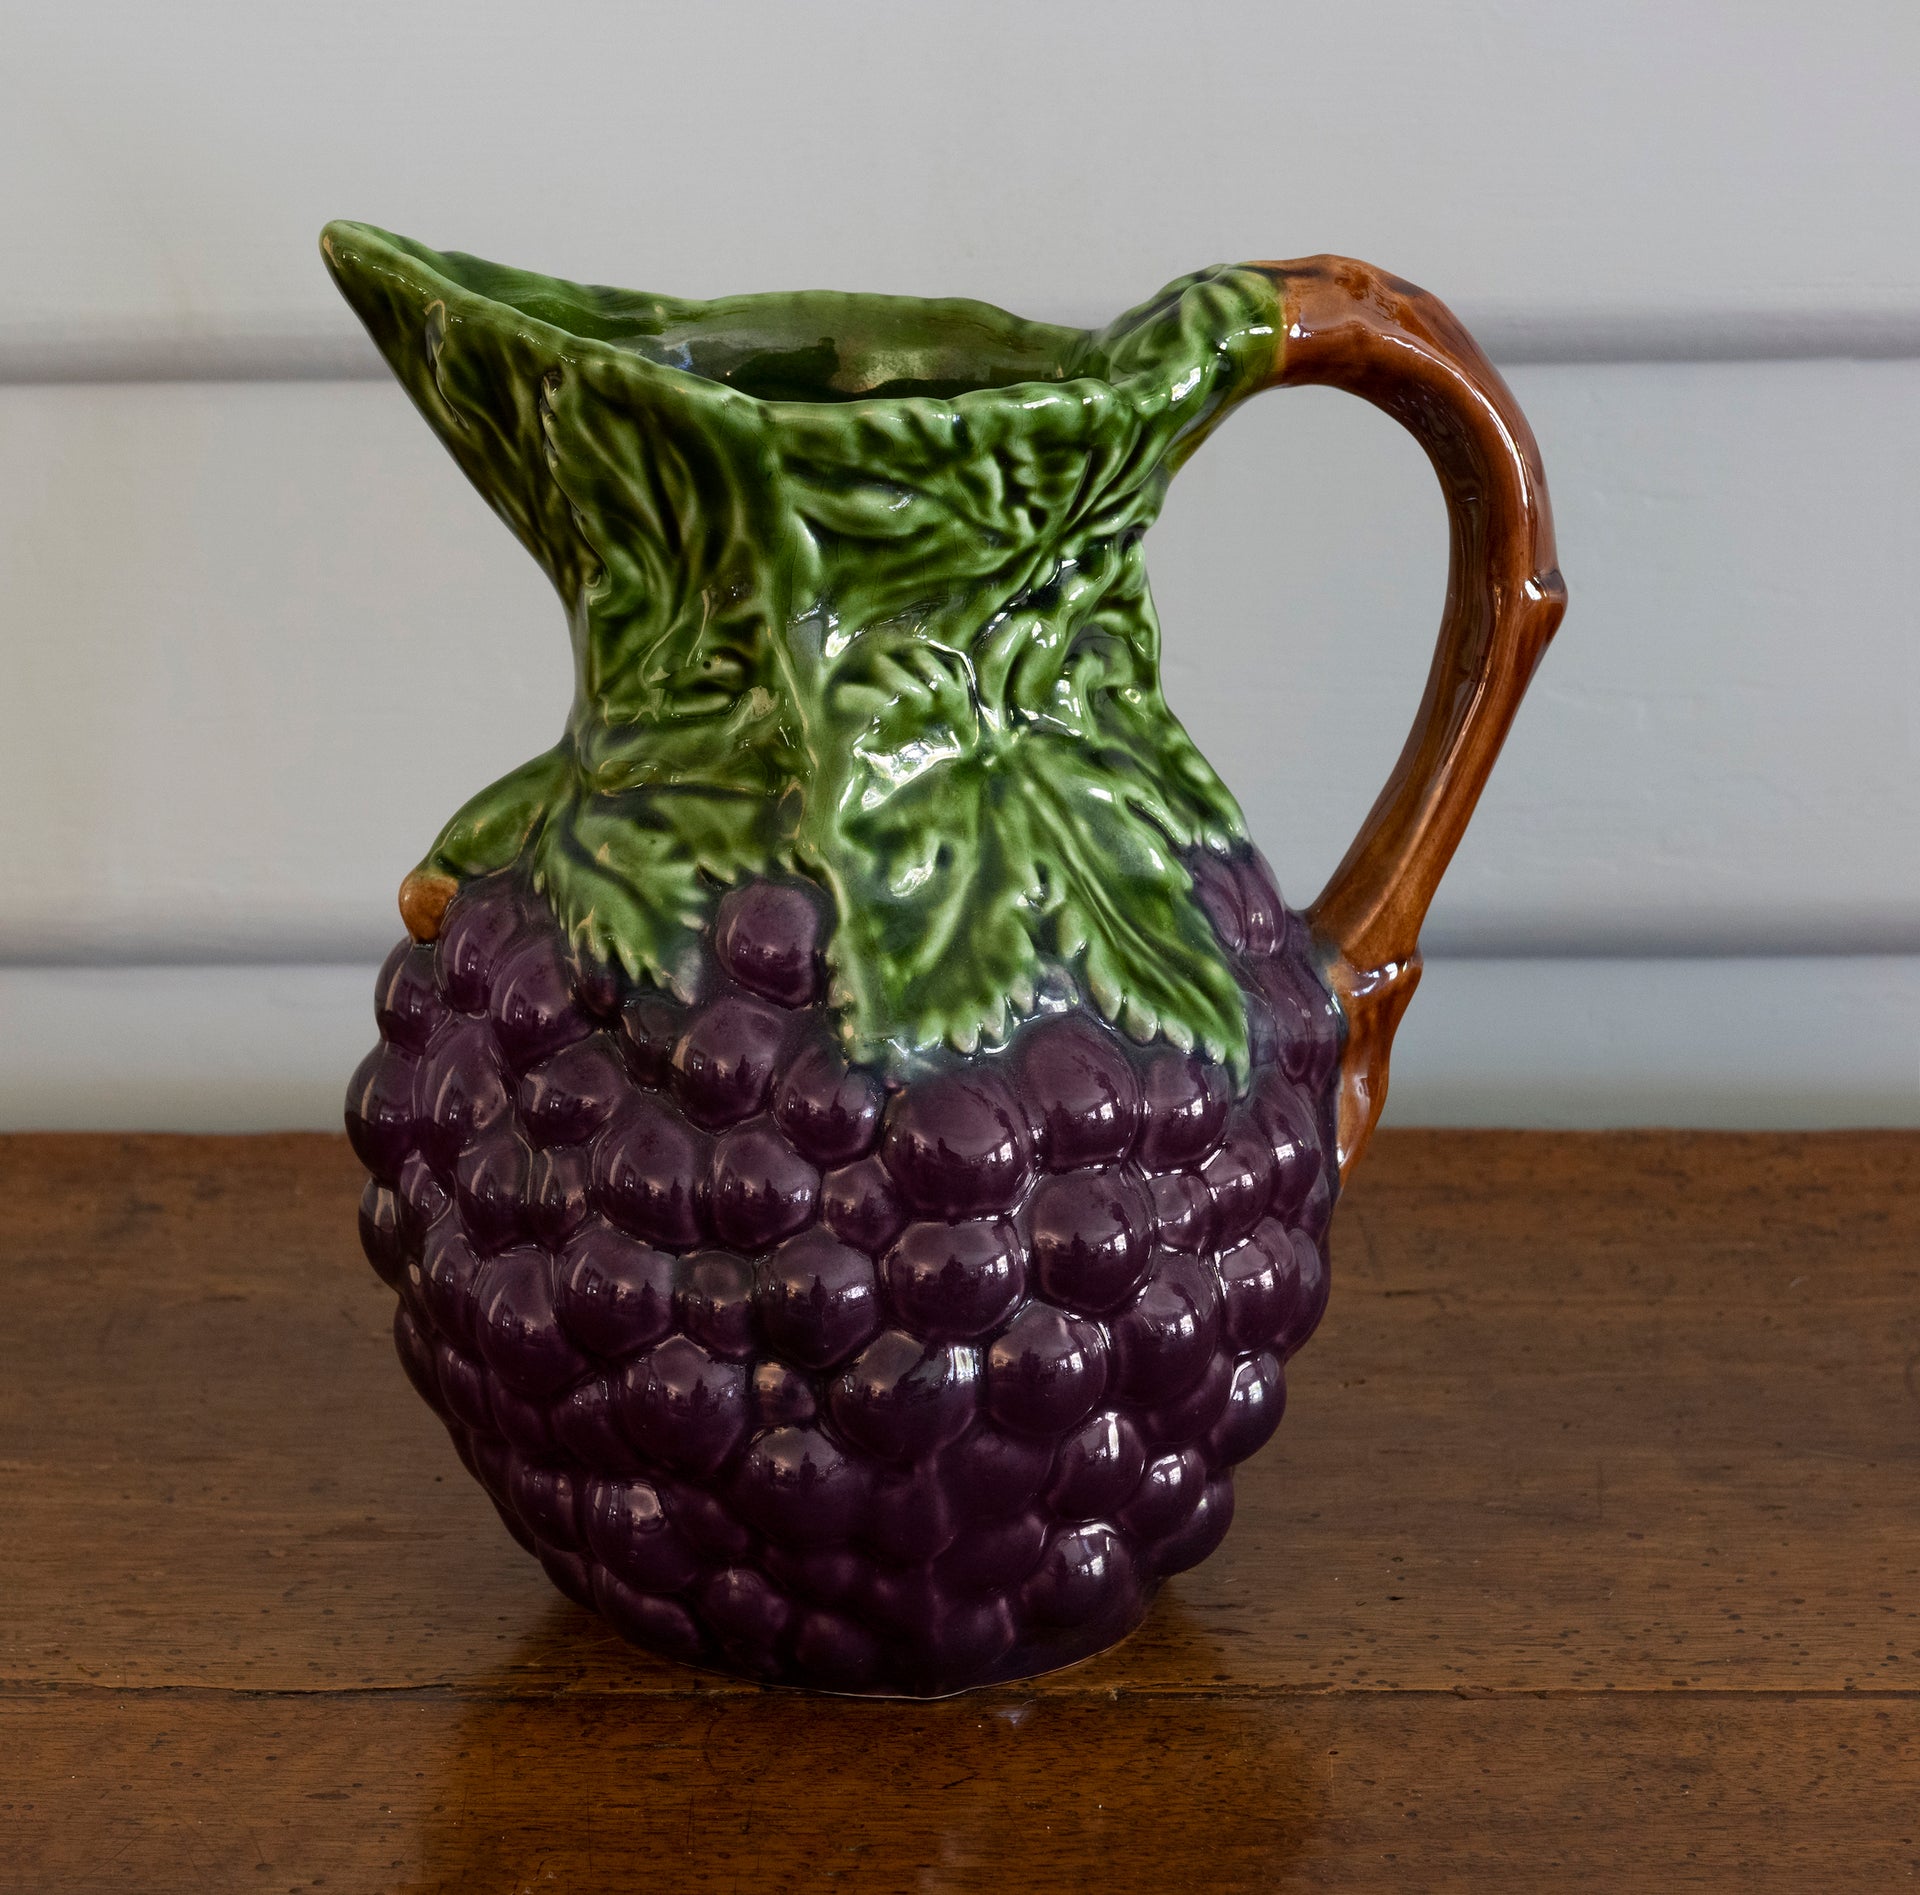 SOLD An appealing vintage French faience wine or water jug moulded with grapes